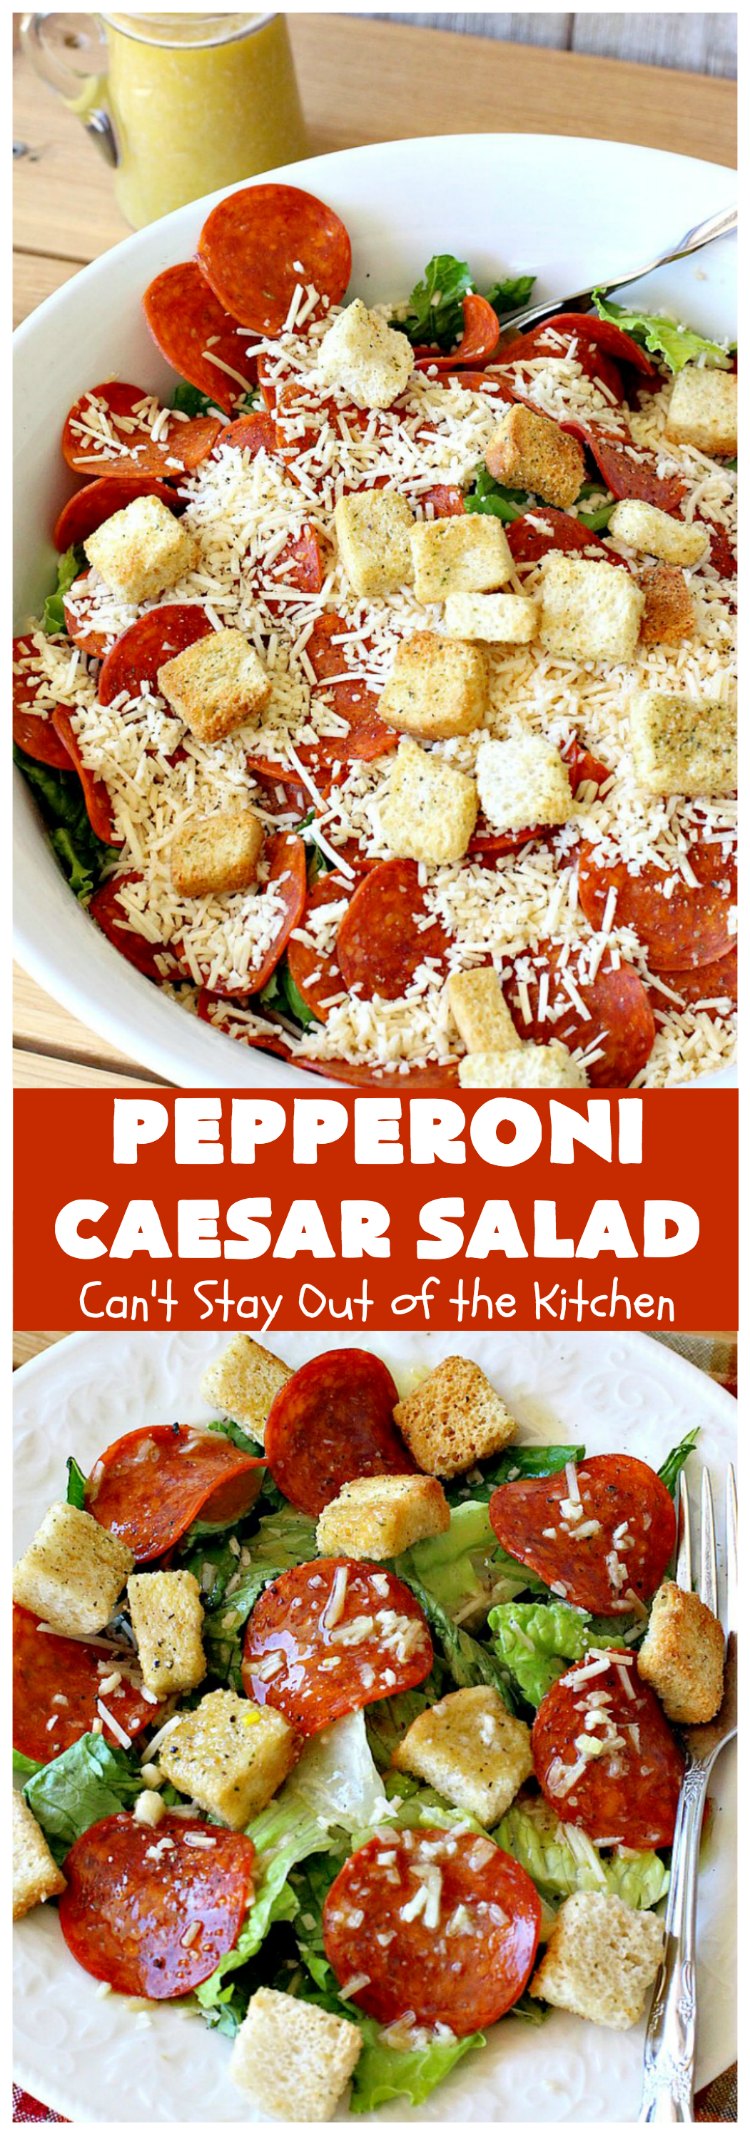 Pepperoni Caesar Salad | Can't Stay Out of the Kitchen | this scrumptious #salad has the deliciousness of #CaesarSalad but with the marvelous addition of #pepperoni! It takes only 10 minutes to make the salad & dressing, so it's quick & easy to prepare. #PepperoniCaesarSalad 